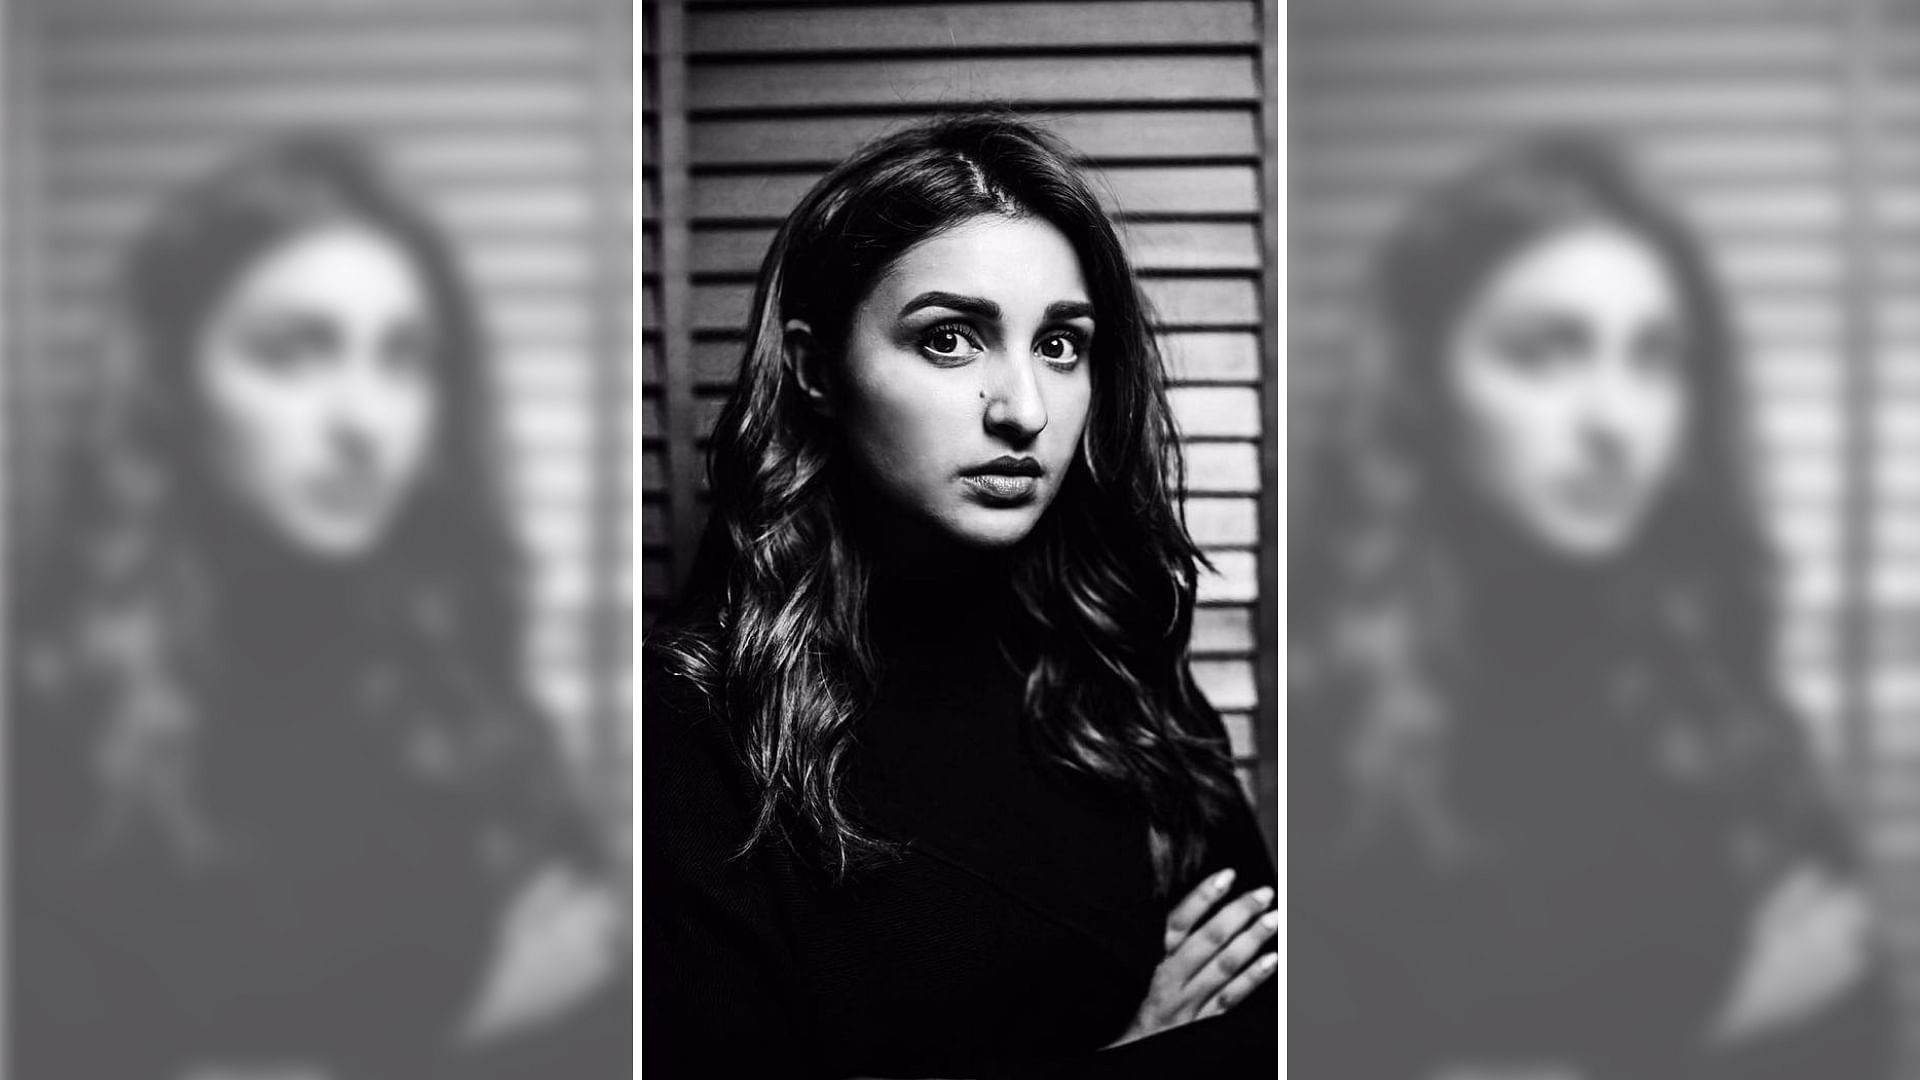 Parineeti Chopra is filling in Emily Blunt’s shoes in the Hindi remake of <i>The Girl on the Train</i>.